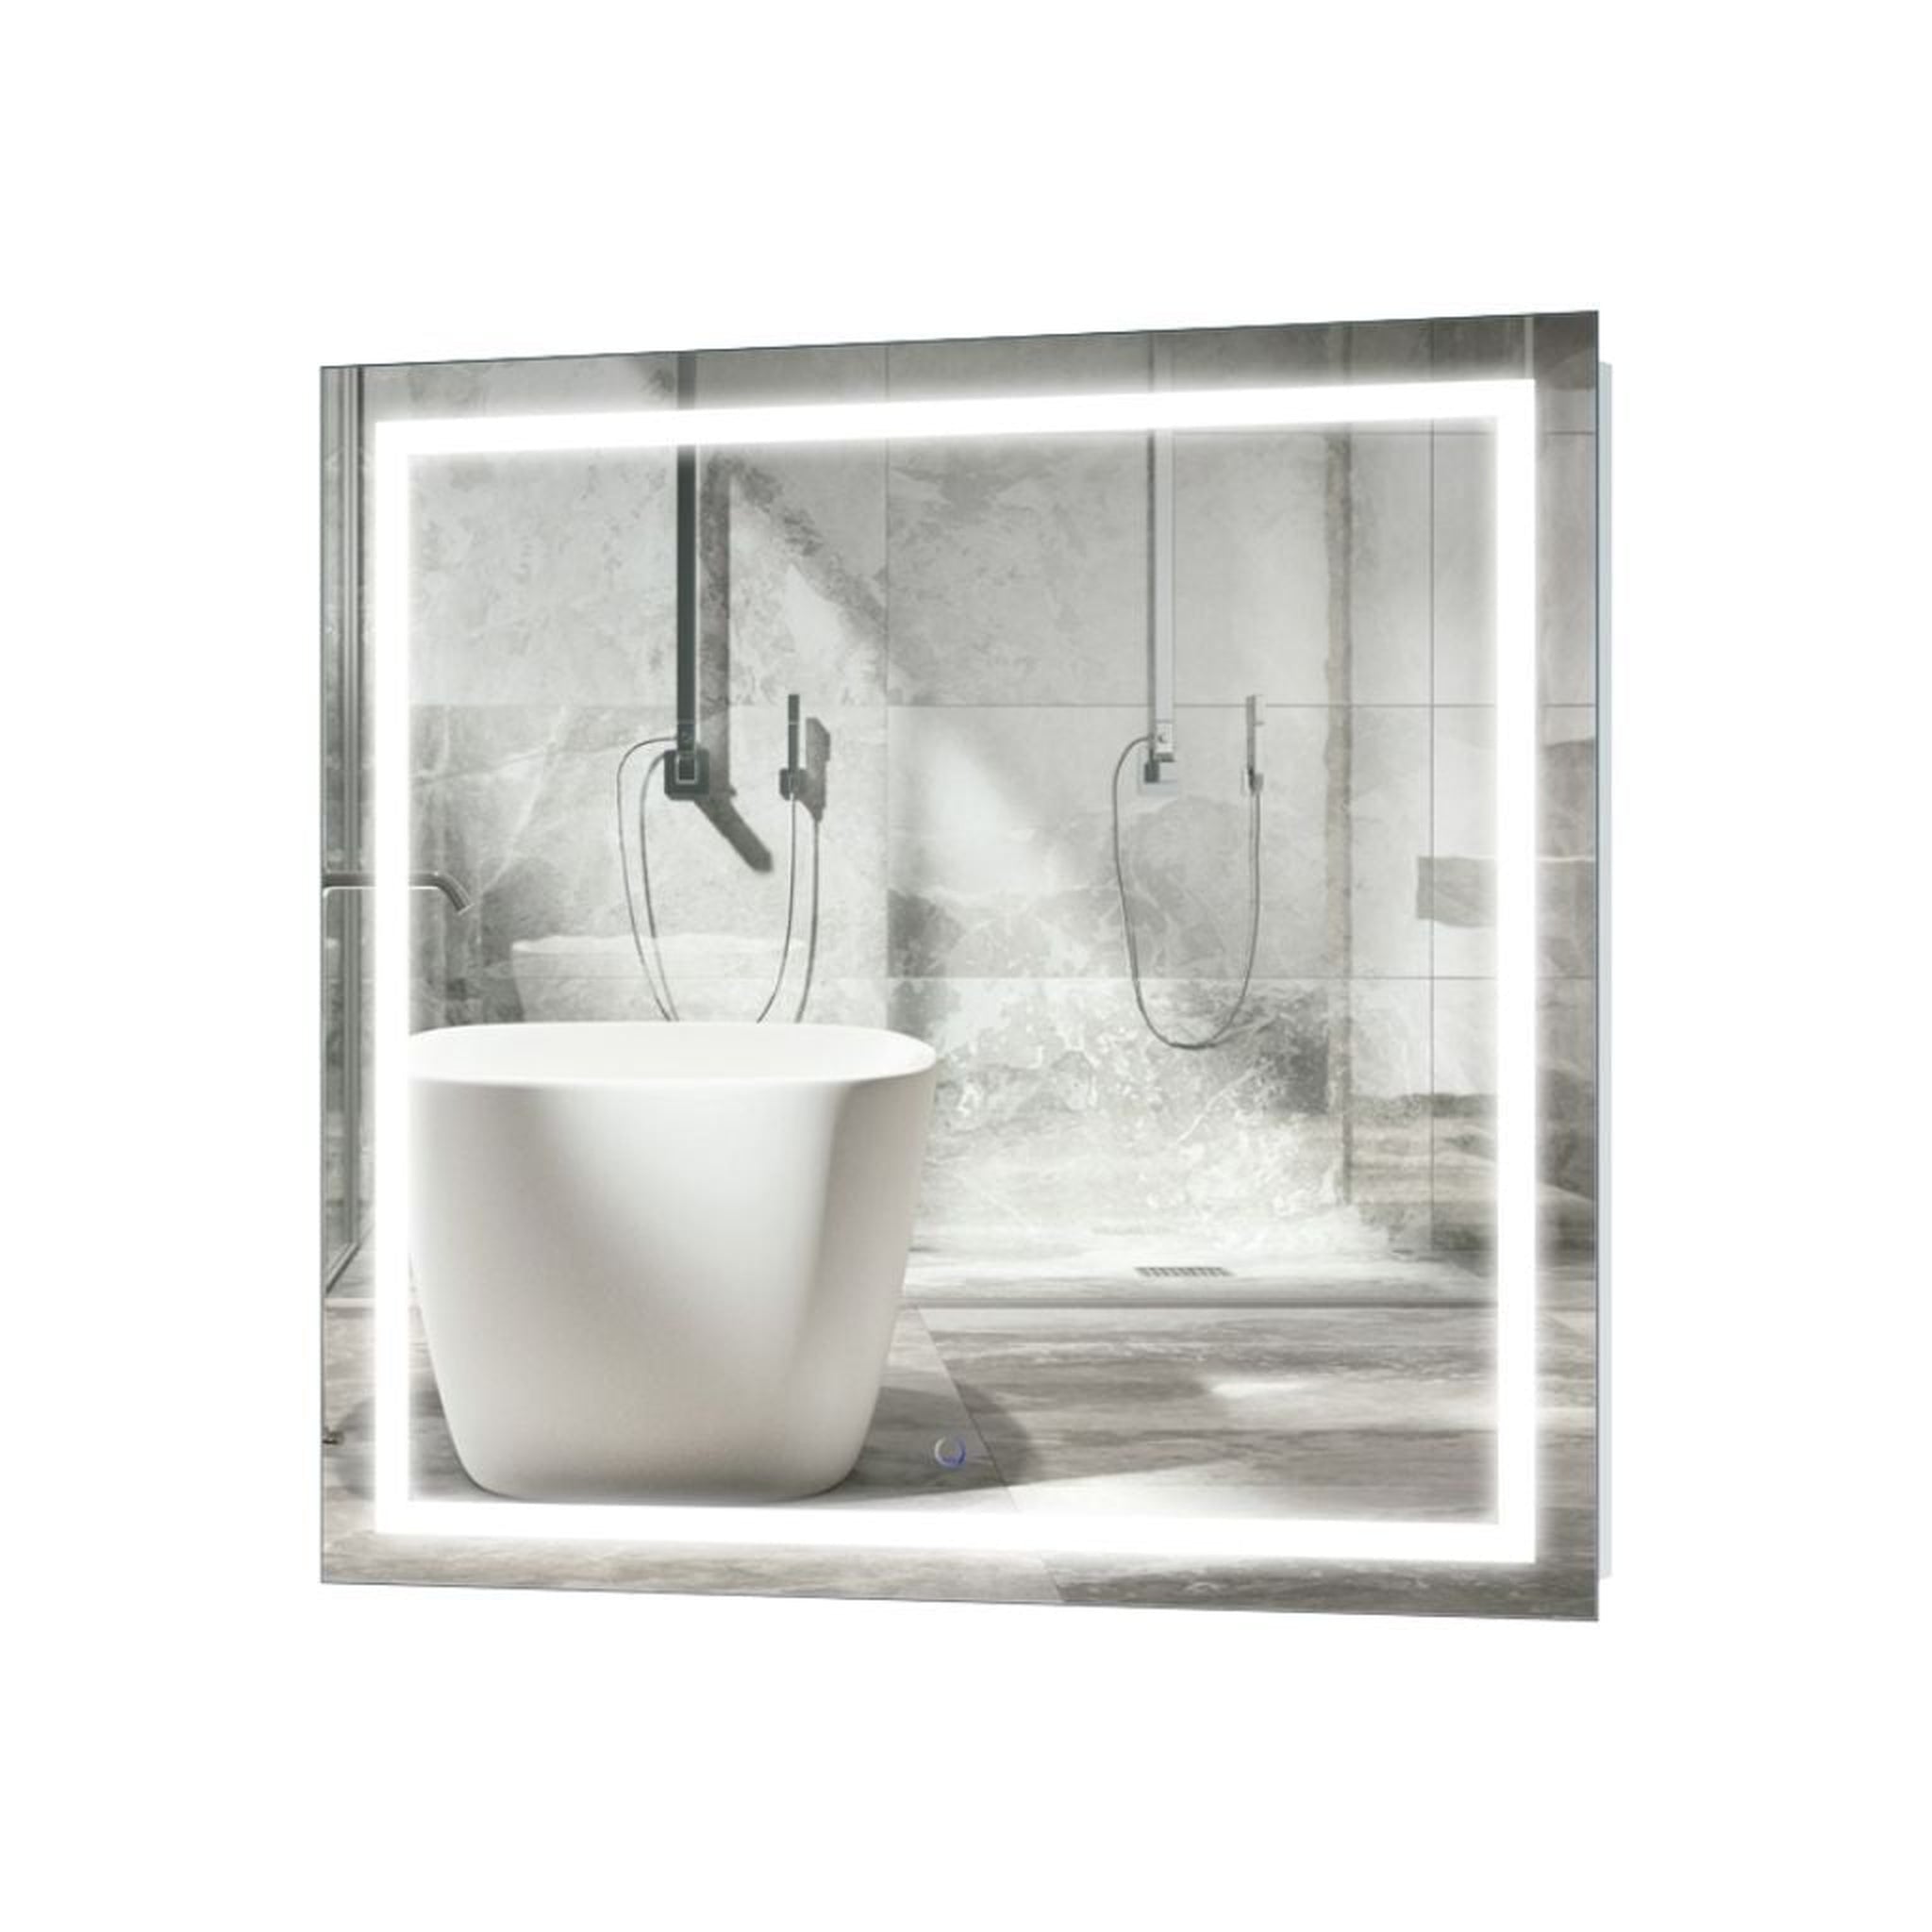 Krugg Reflections, Krugg Reflections Icon 36" x 36" 5000K Square Wall-Mounted Illuminated Silver Backed LED Mirror With Built-in Defogger and Touch Sensor On/Off Built-in Dimmer